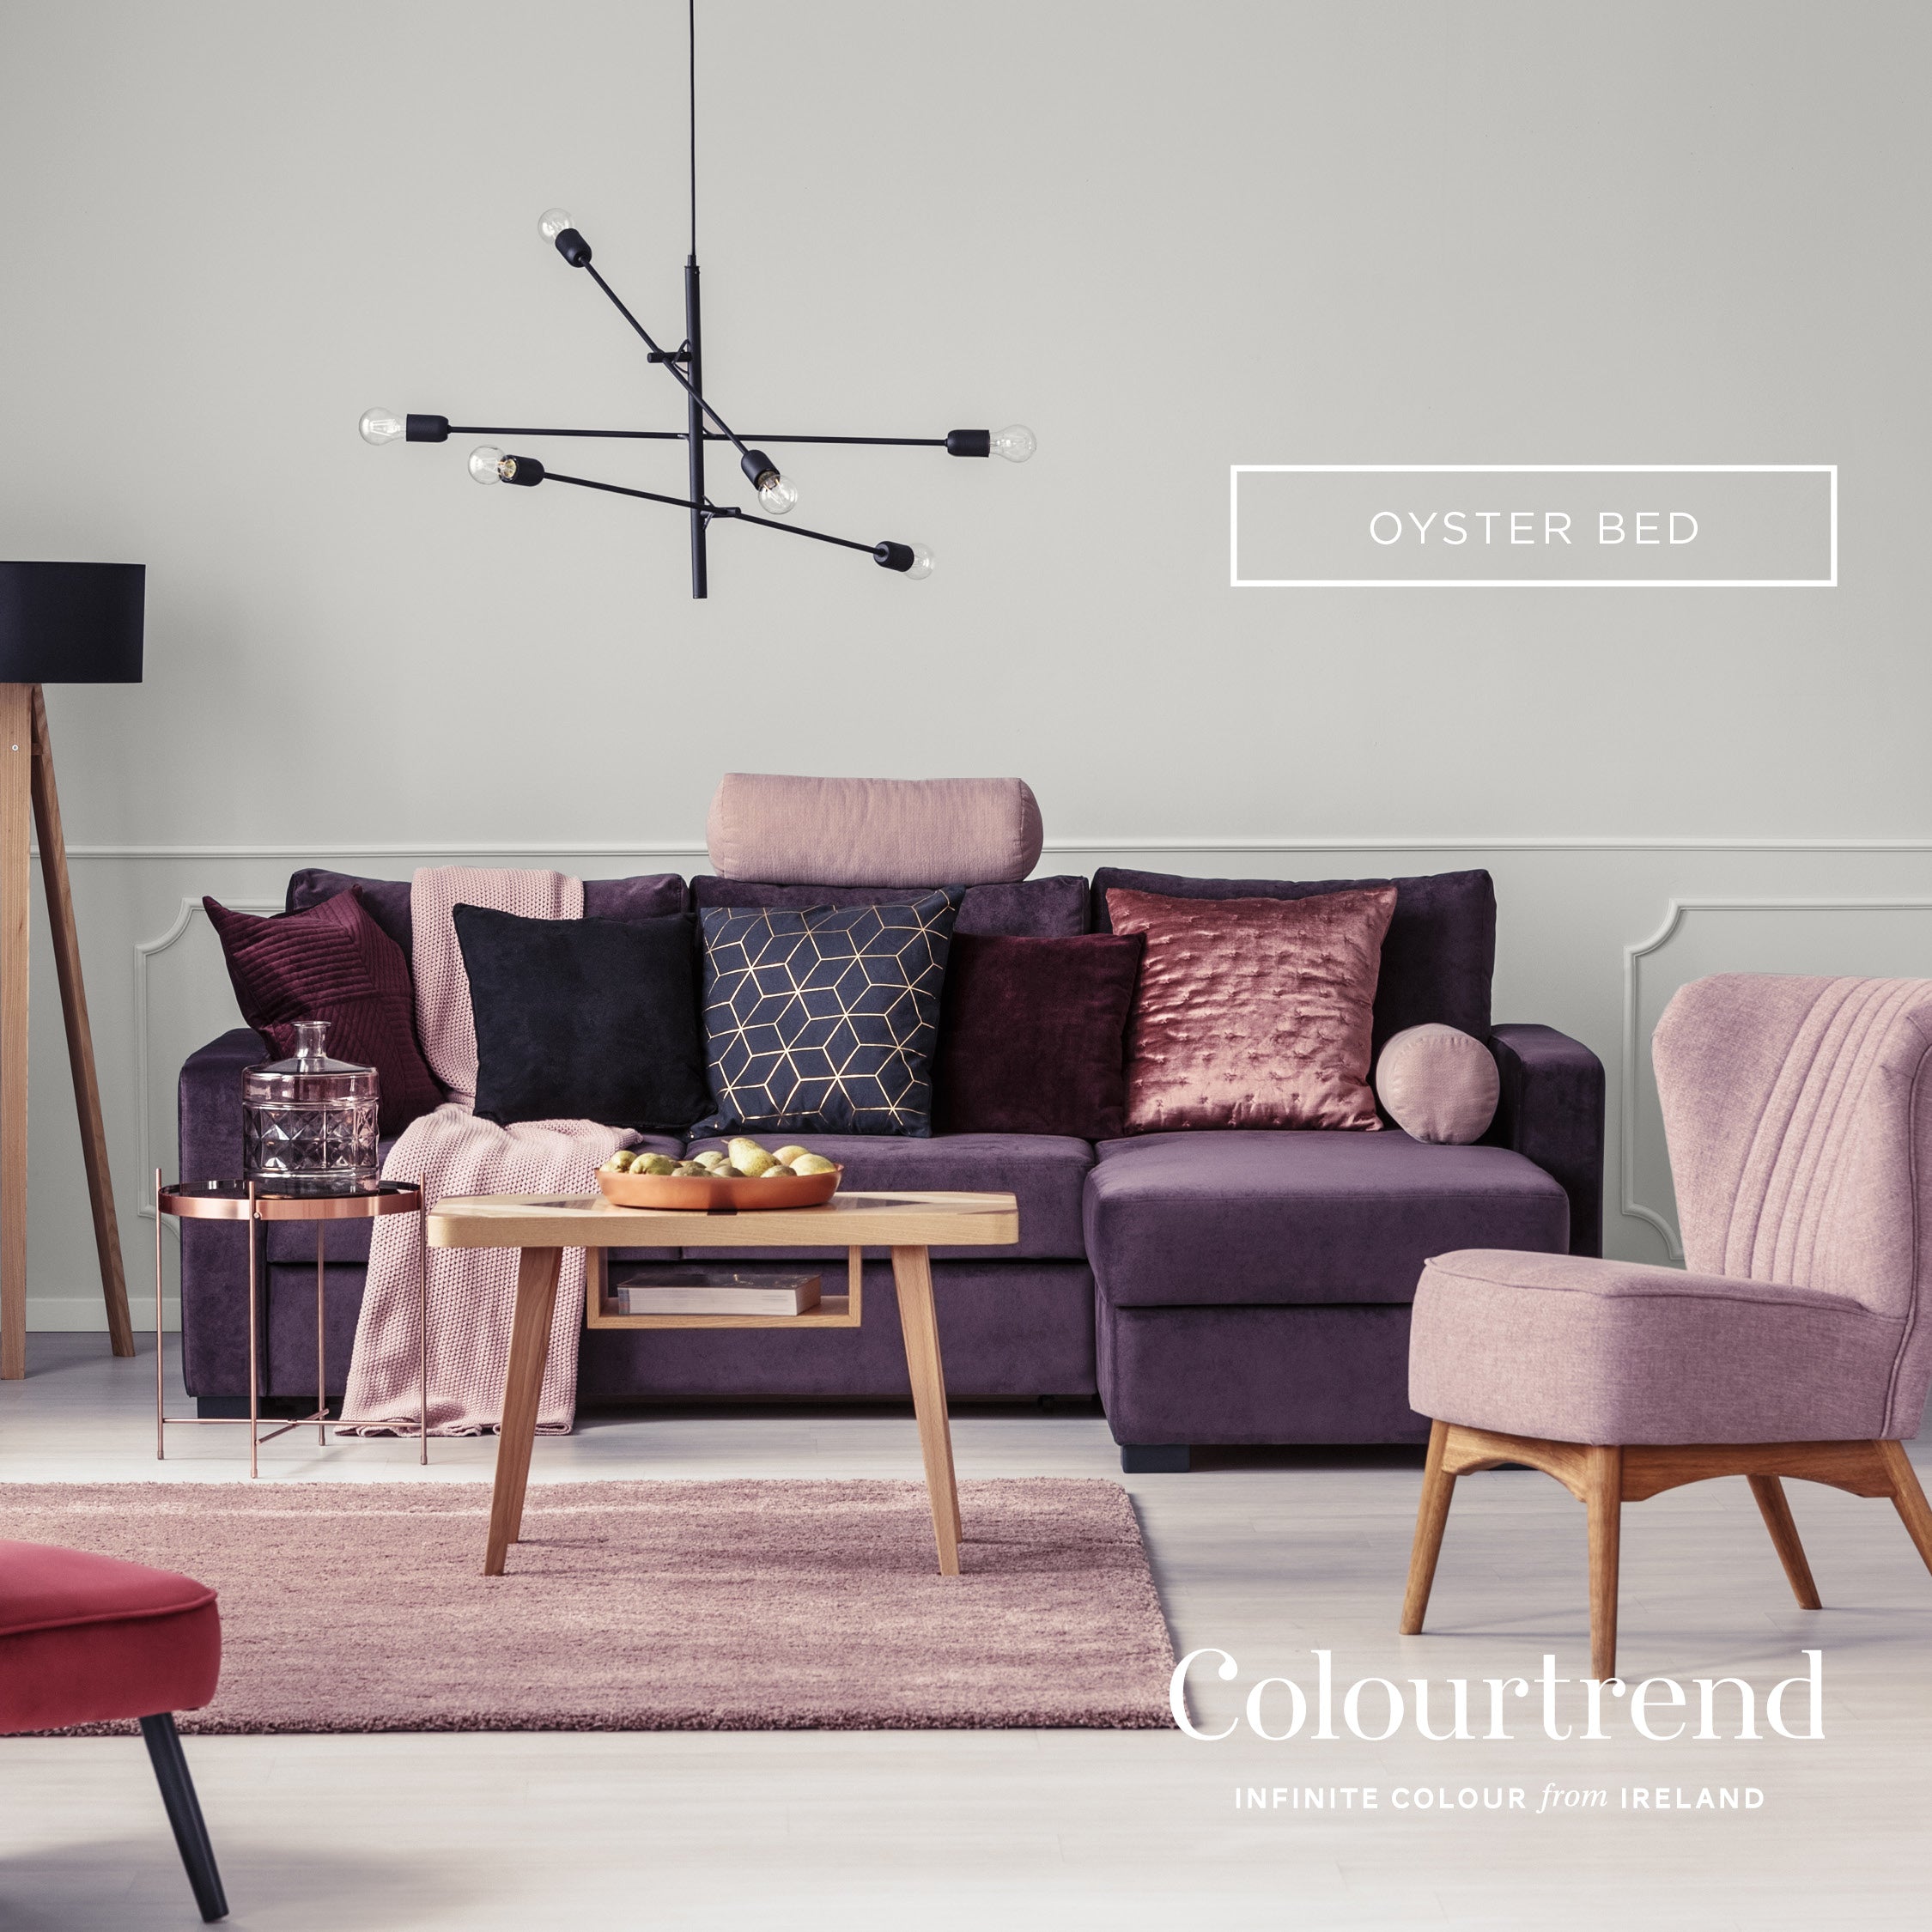 Oyster Bed by Colourtrend - Order Beautiful Paints from our Contemporary  Collection - Colourtrend Paints